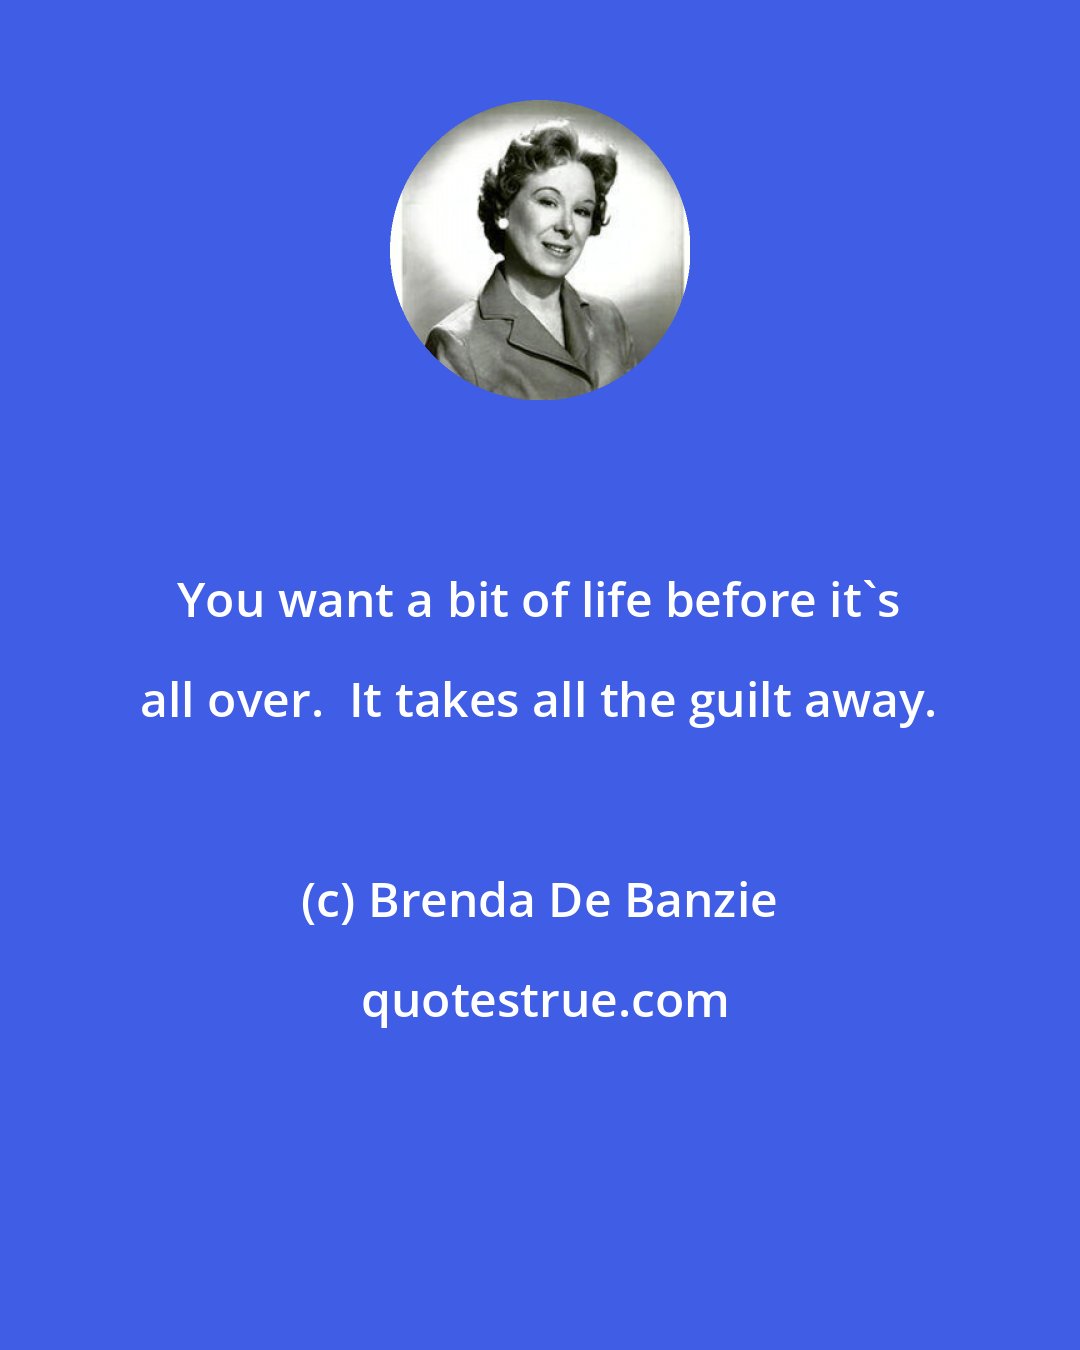 Brenda De Banzie: You want a bit of life before it's all over.  It takes all the guilt away.